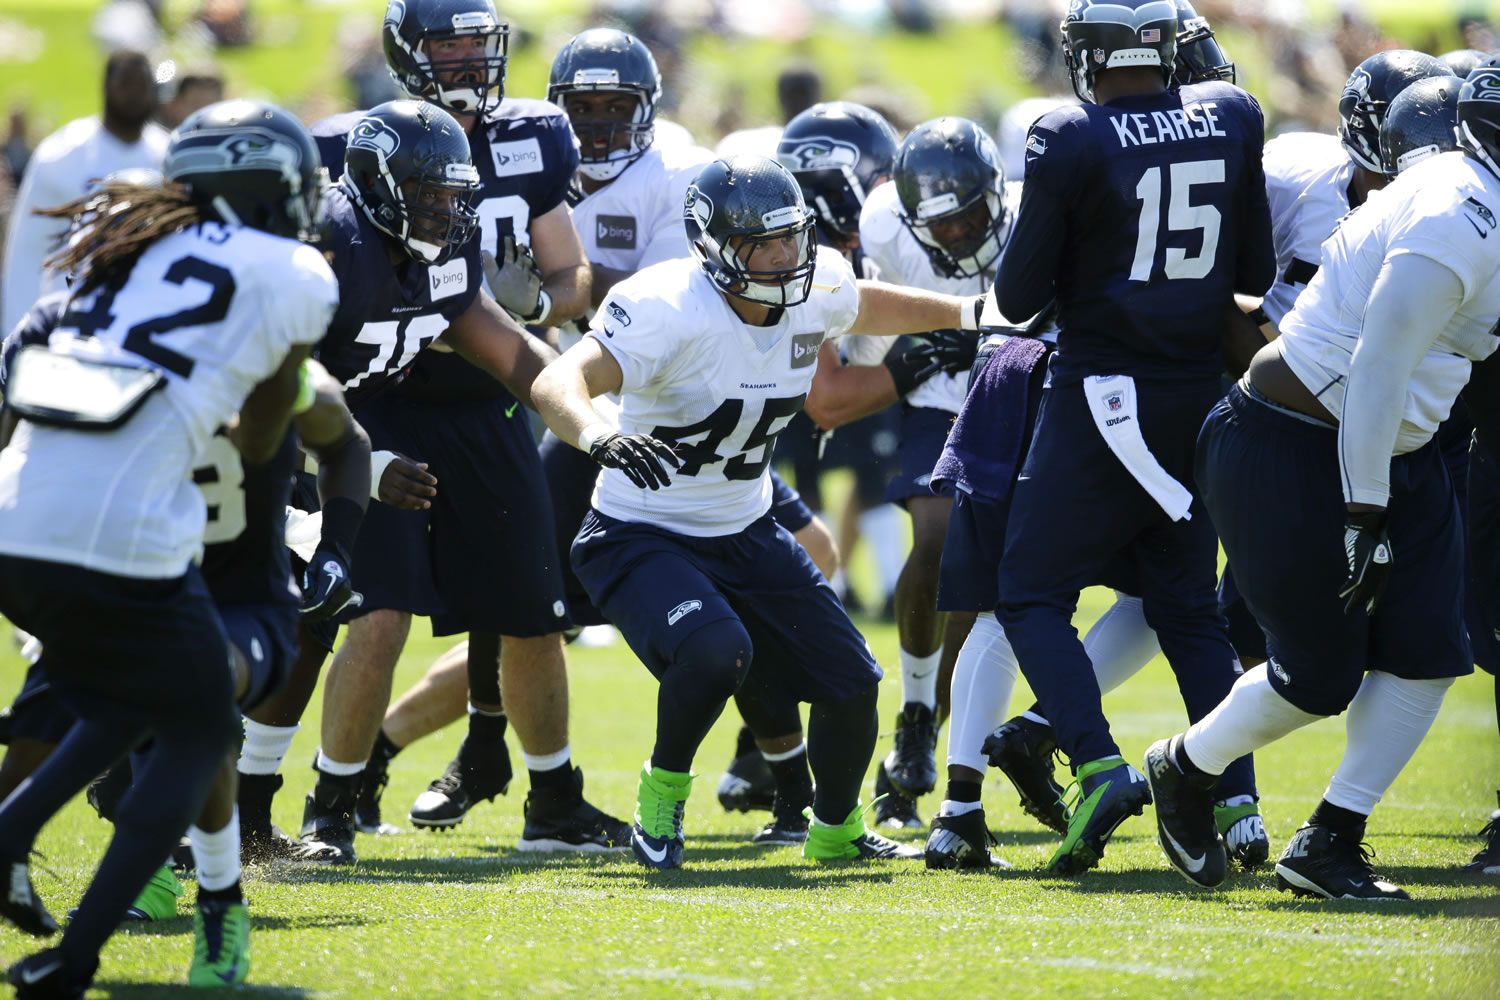 Seattle Seahawks linebacker Brock Coyle (45), center, takes part in a practice drill during NFL football training camp, Thursday, July 31, 2014, in Renton, Wash.